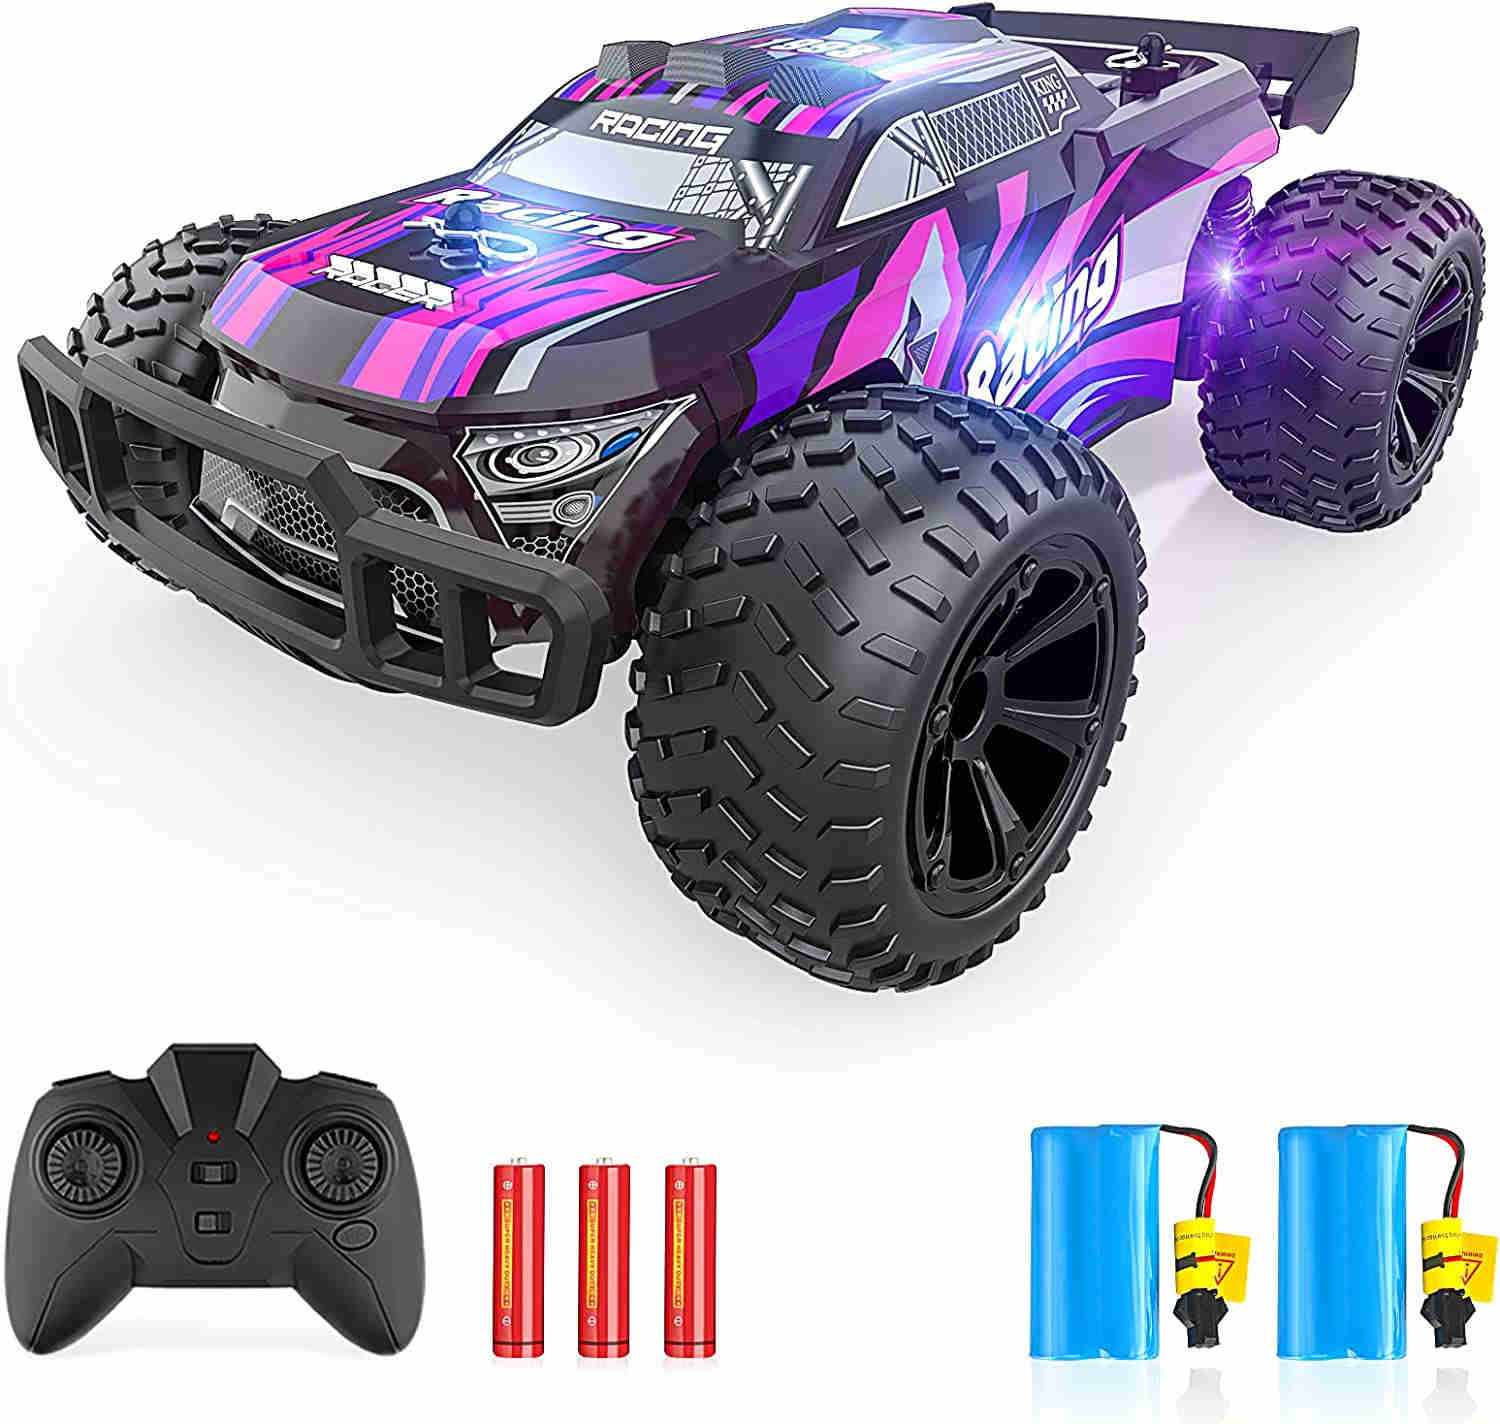 Aomifmik Remote Control Car, 2.4GHz High Speed RC Cars, Off Road Hobby RC Racing Car with 2 Rechargeable Batteries and Led Lights, Electric Toy Car Gift for 3 4 5 6 7 8 Year Old Boys Girls Kids